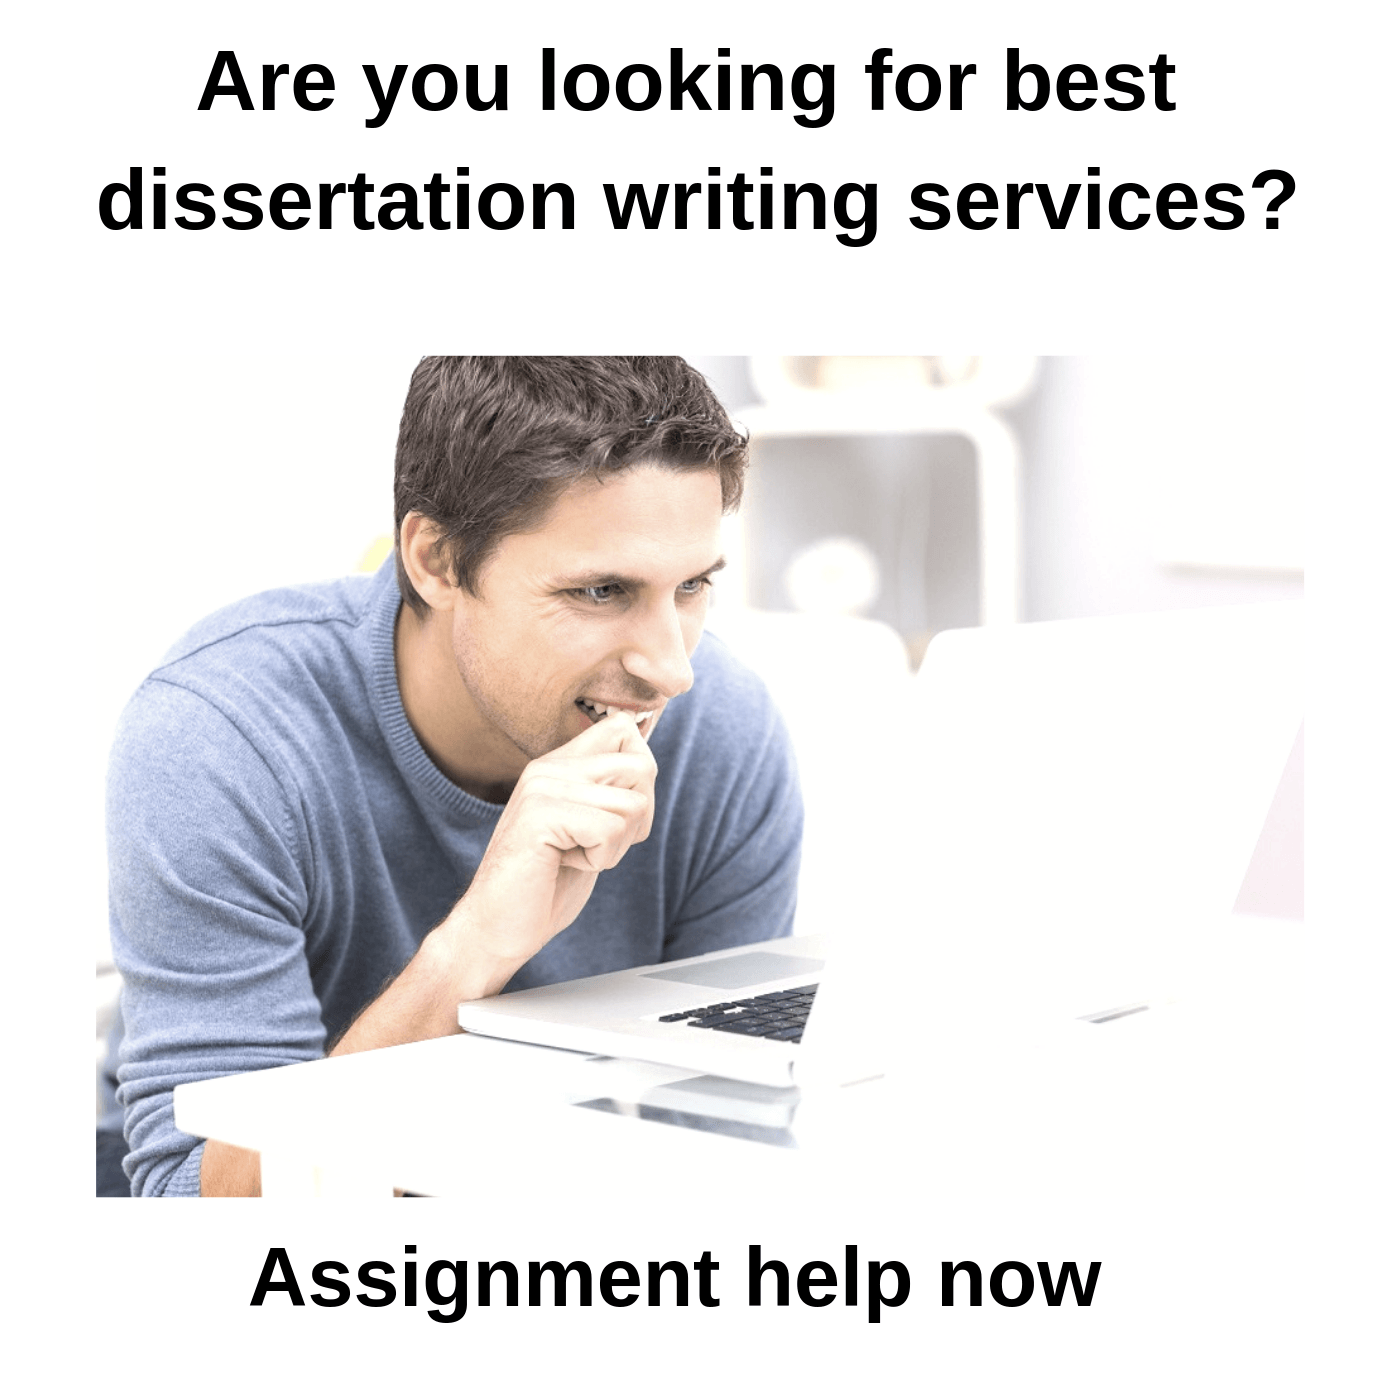 Dissertation writing services malaysia work